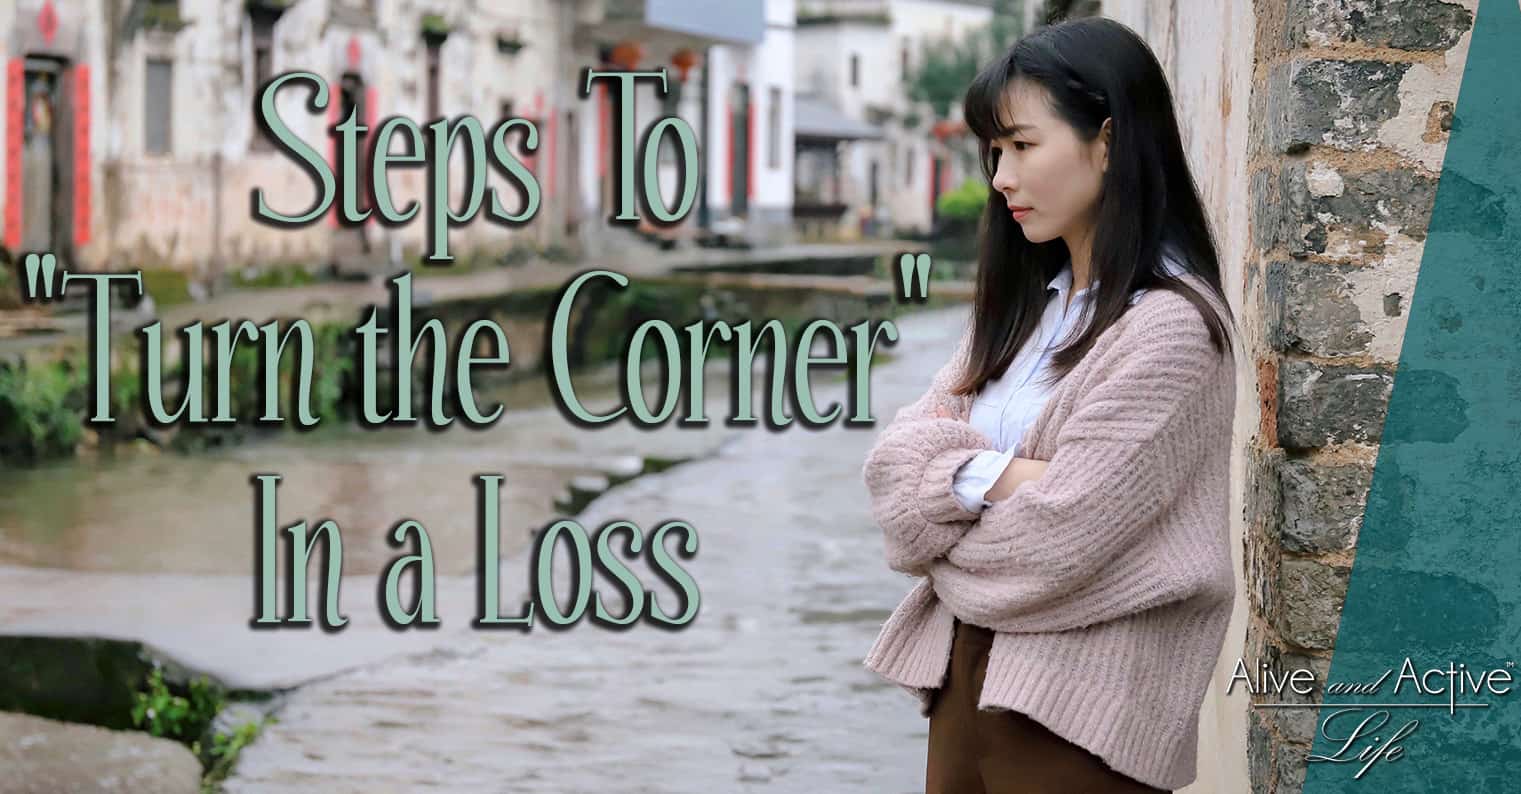 Steps To “Turn the Corner” In A Loss